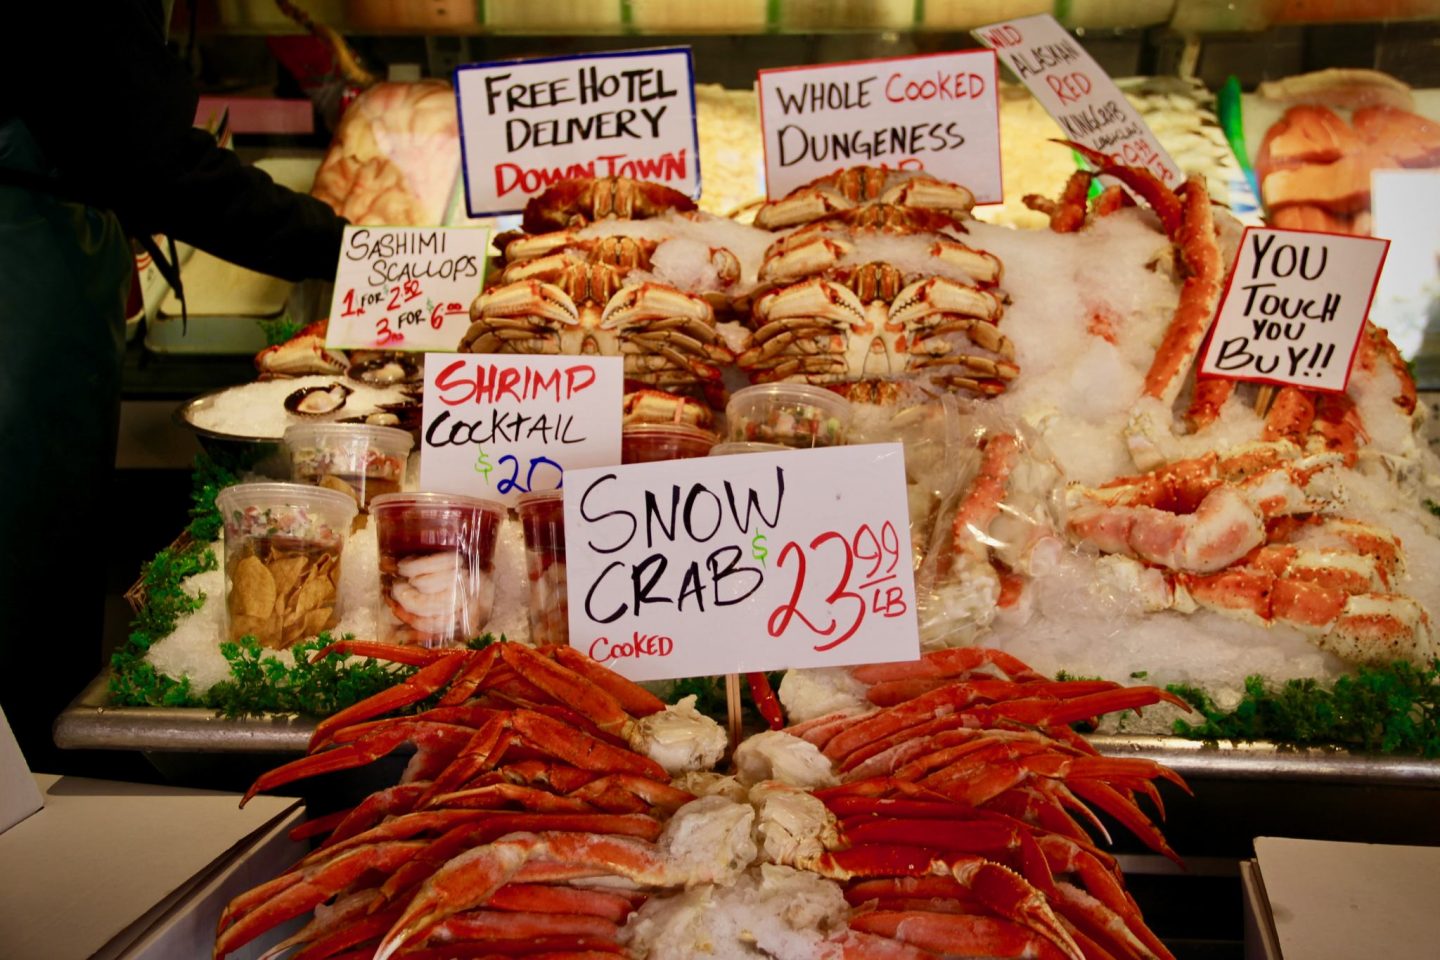 Fresh Seafood in Pike Place Public Market in Seattle, Washington - The Spectacular Adventurer